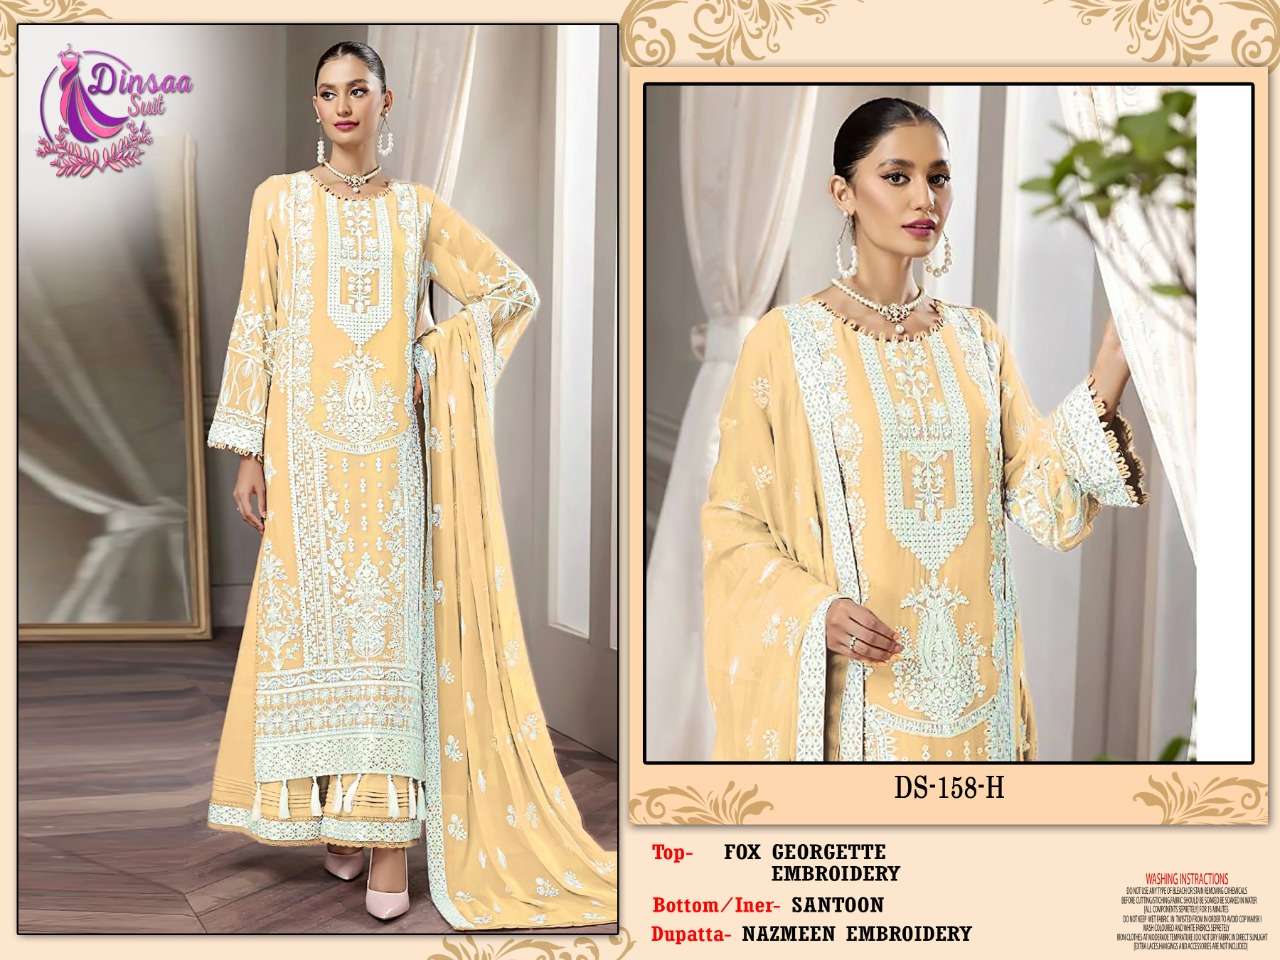 DINSAA SUITS PRESENTS 158 E TO H GEORGETTE EMBROIDERY WHOLESALE PAKISTANI SUITS